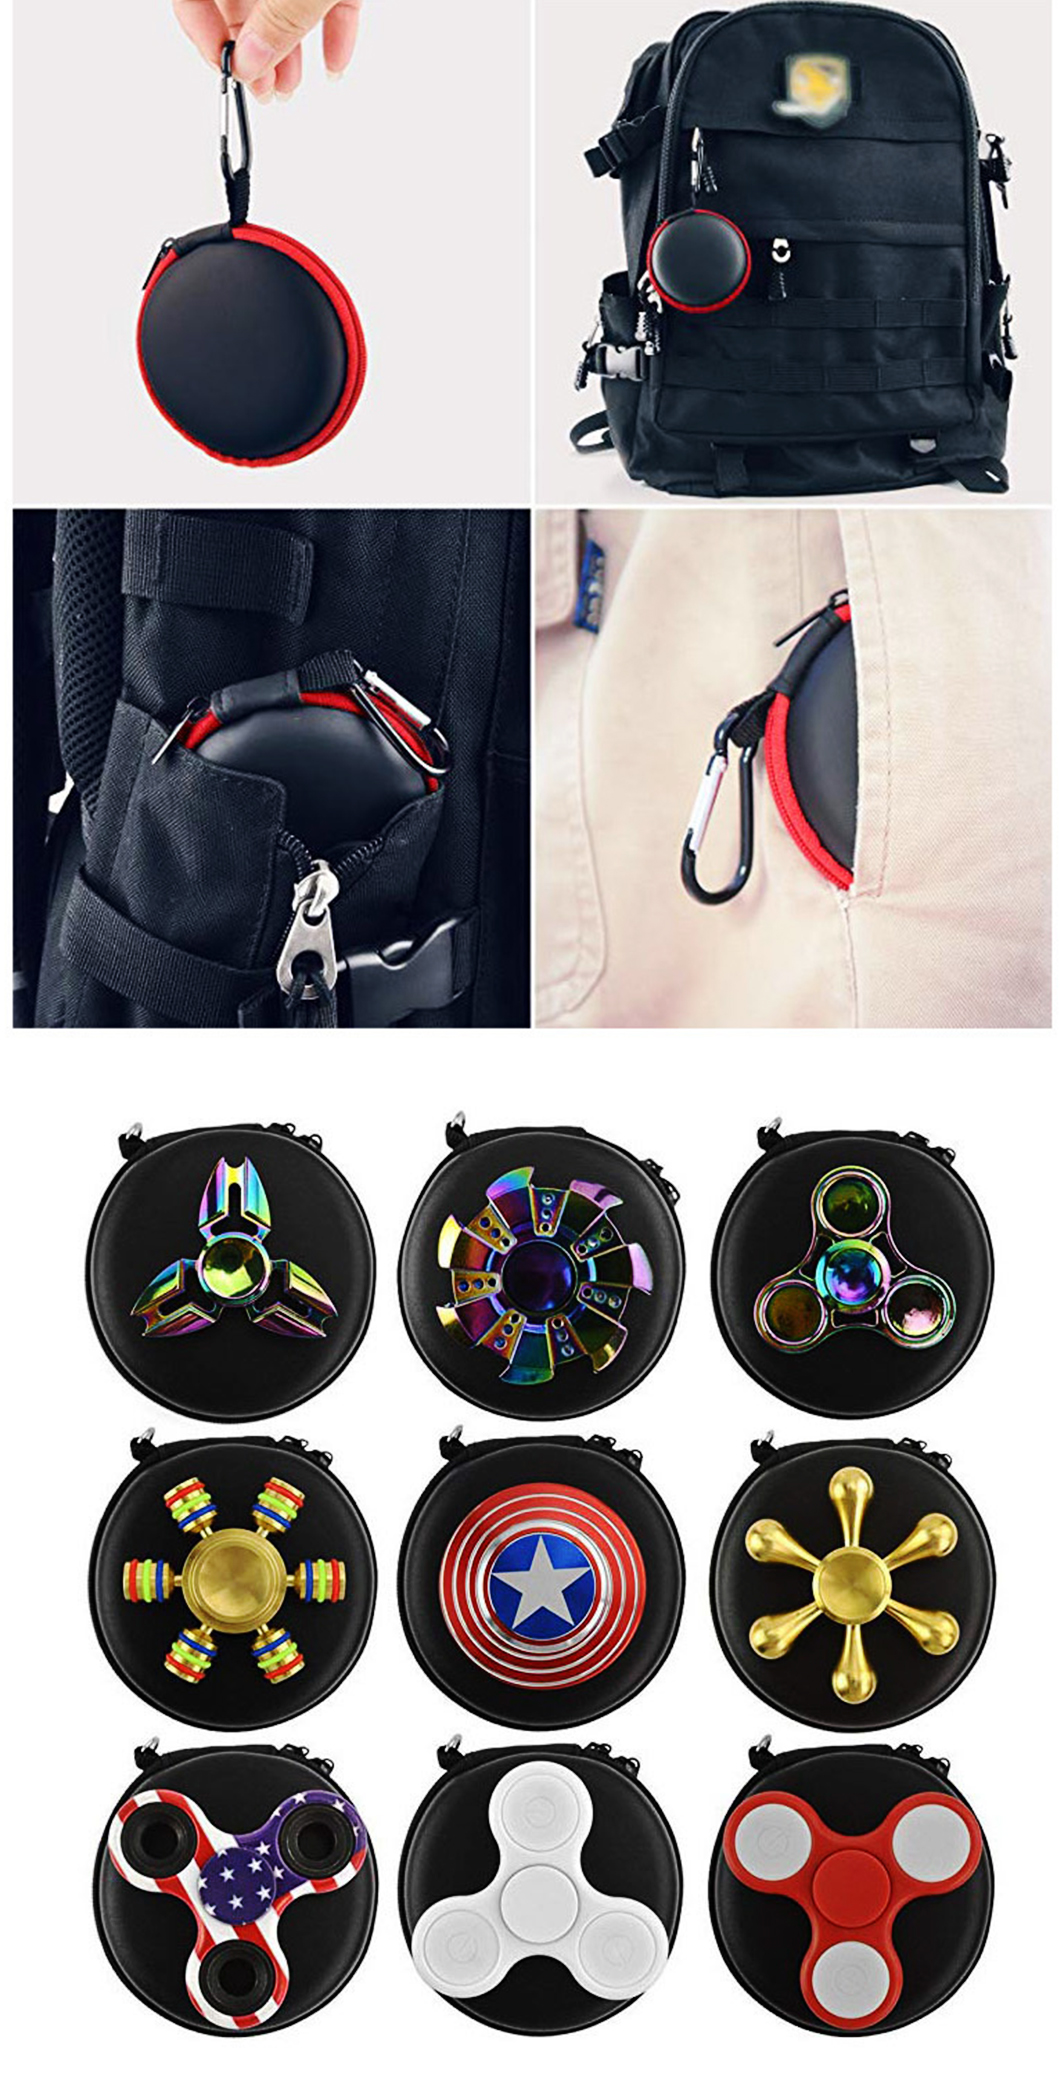 Portable EVA Hard Protective Carrying Case for Earphones, Fidget Spinner or Mini Parts(图4)